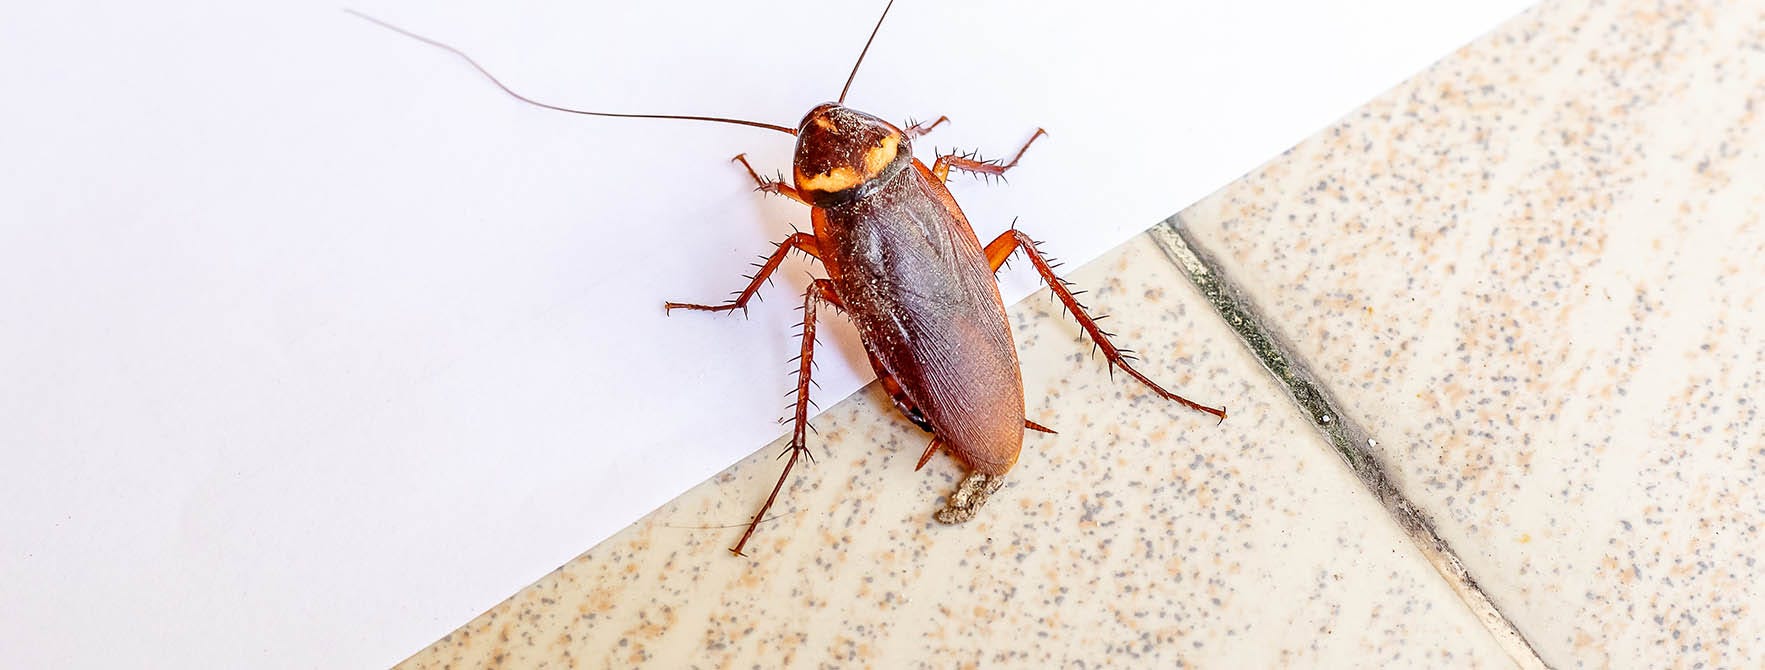 Cockroach Facts | All About Roaches | Roach Control